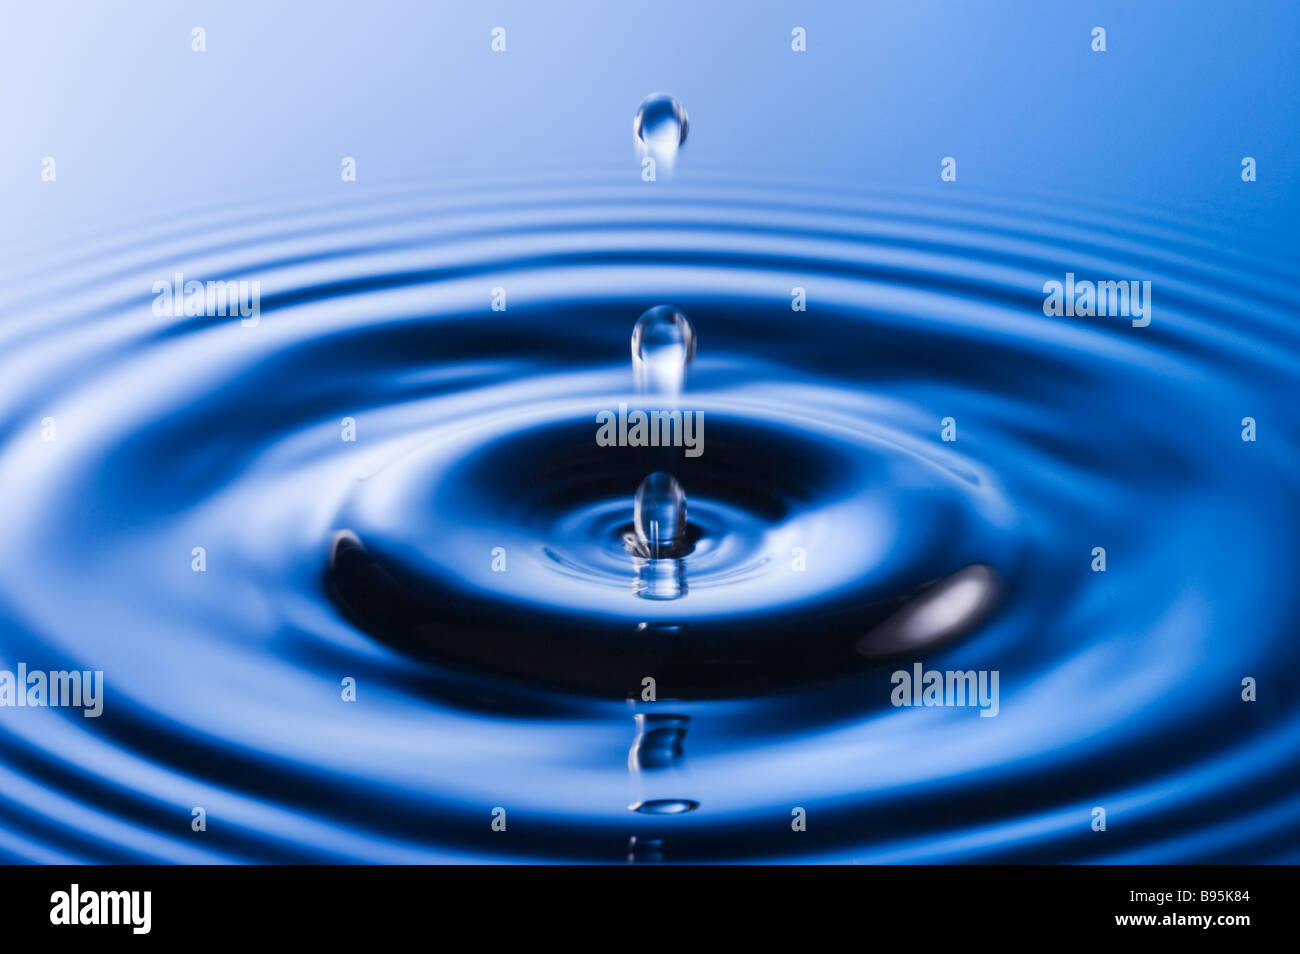 Water droplet causing ripples Stock Photo